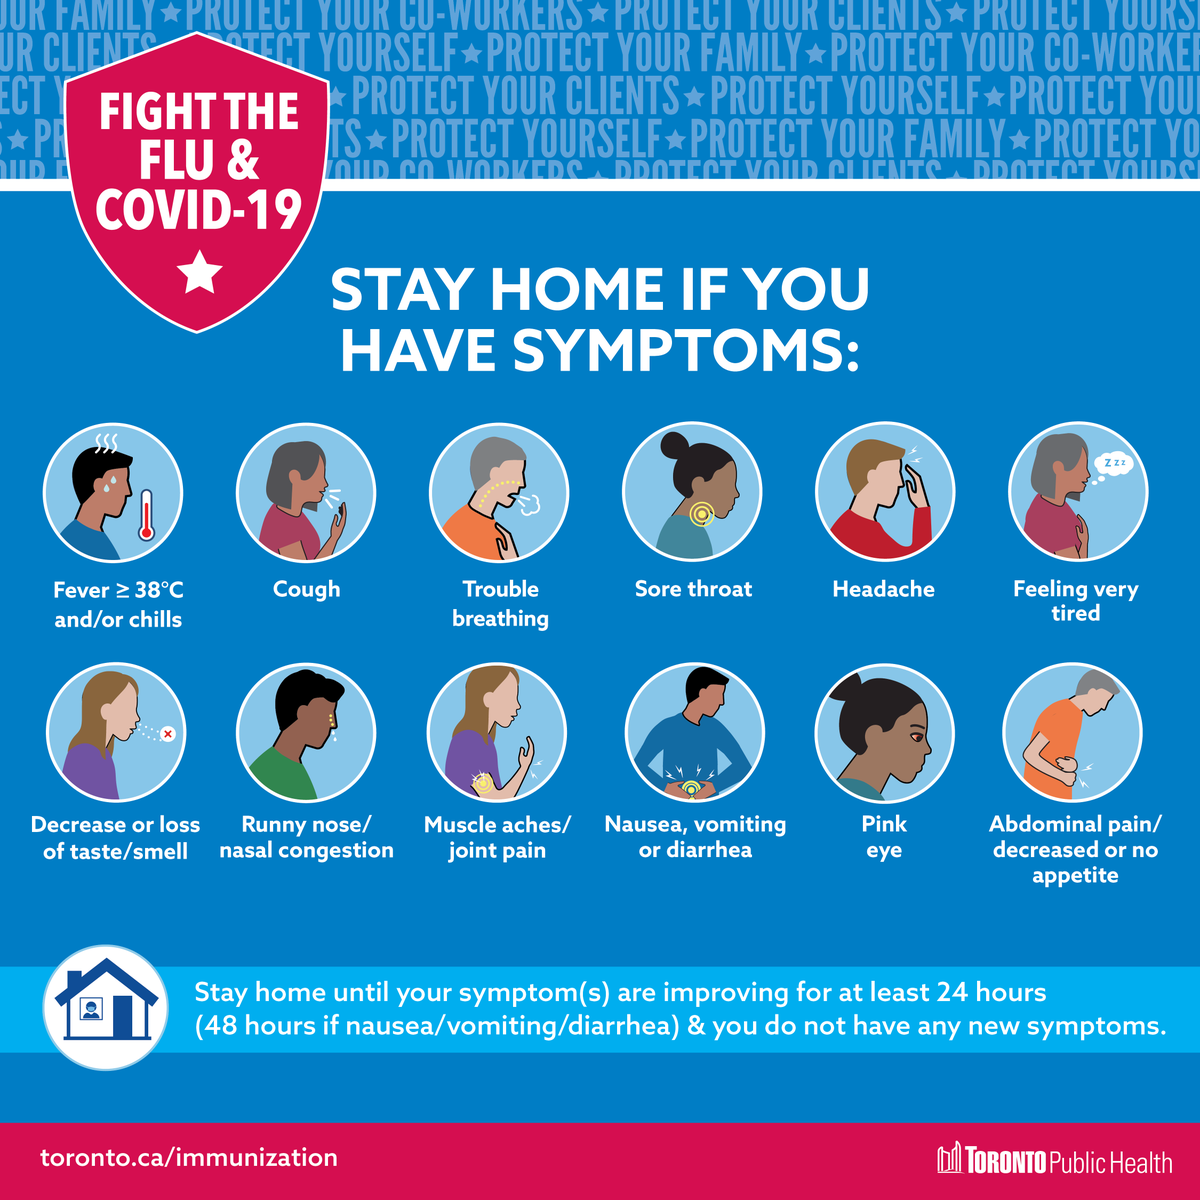 Feeling under the weather? Help keep loved ones & your community safe by staying home if you feel any of these symptoms 👇 Learn more: toronto.ca/community-peop… #flu #COVID19